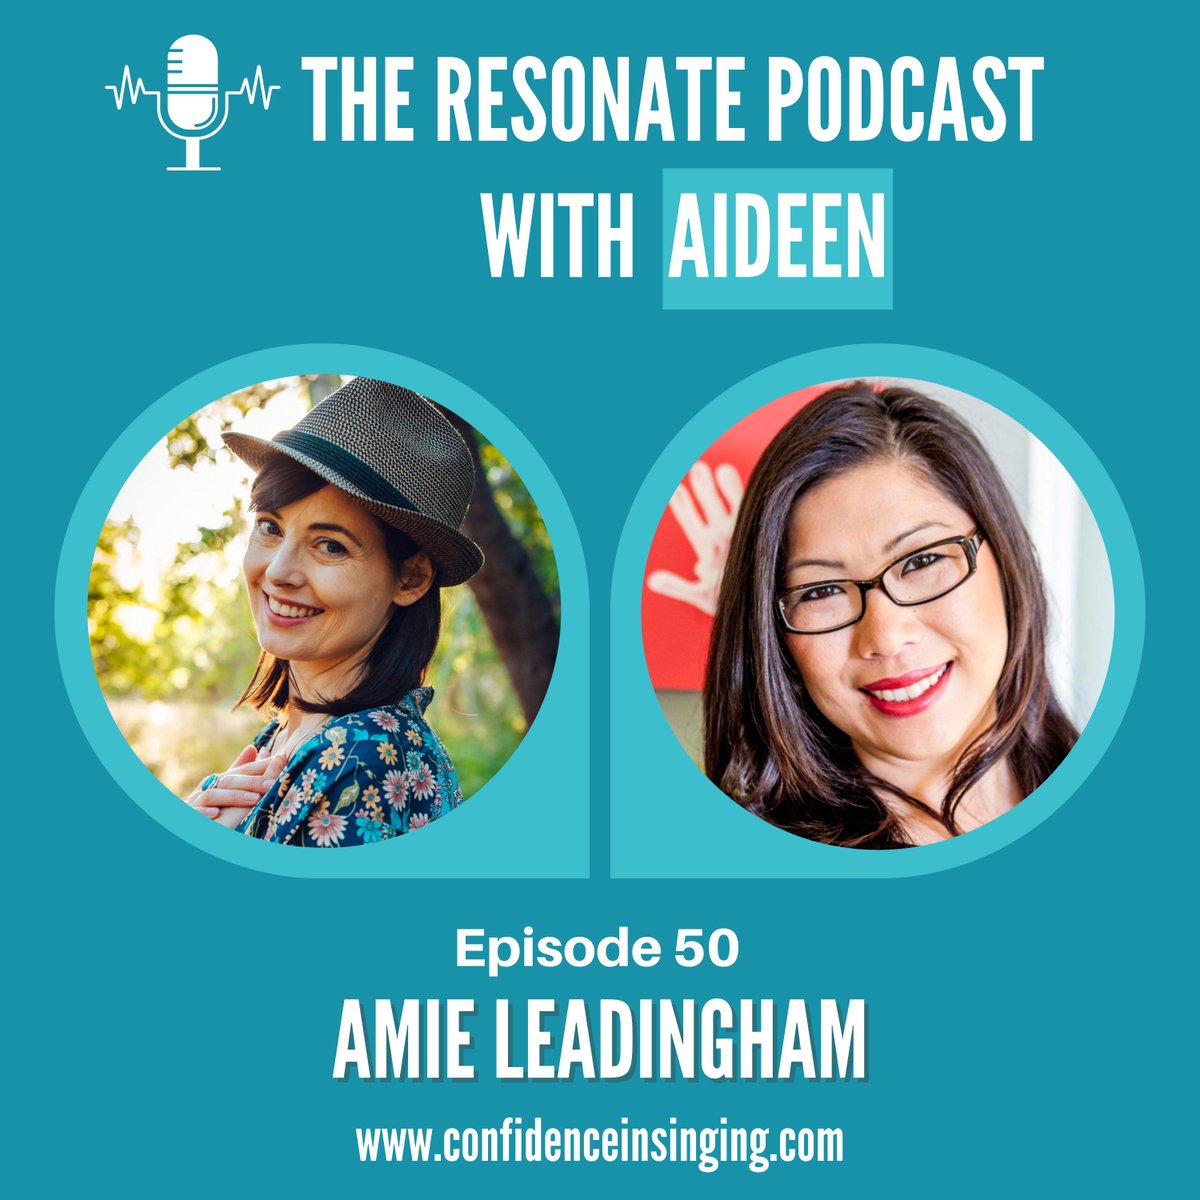 I had the pleasure of speaking with Amie Leadingham, a certified Master relationship coach. Enjoy!
PODCAST ON YOUTUBE: buff.ly/4aMKdN3
AUDIO:buff.ly/3UzQC92
#resonatewithaideen #vocalcoach #intuitivecoach #podcast #holistic #aideenniriada #amieleadingham